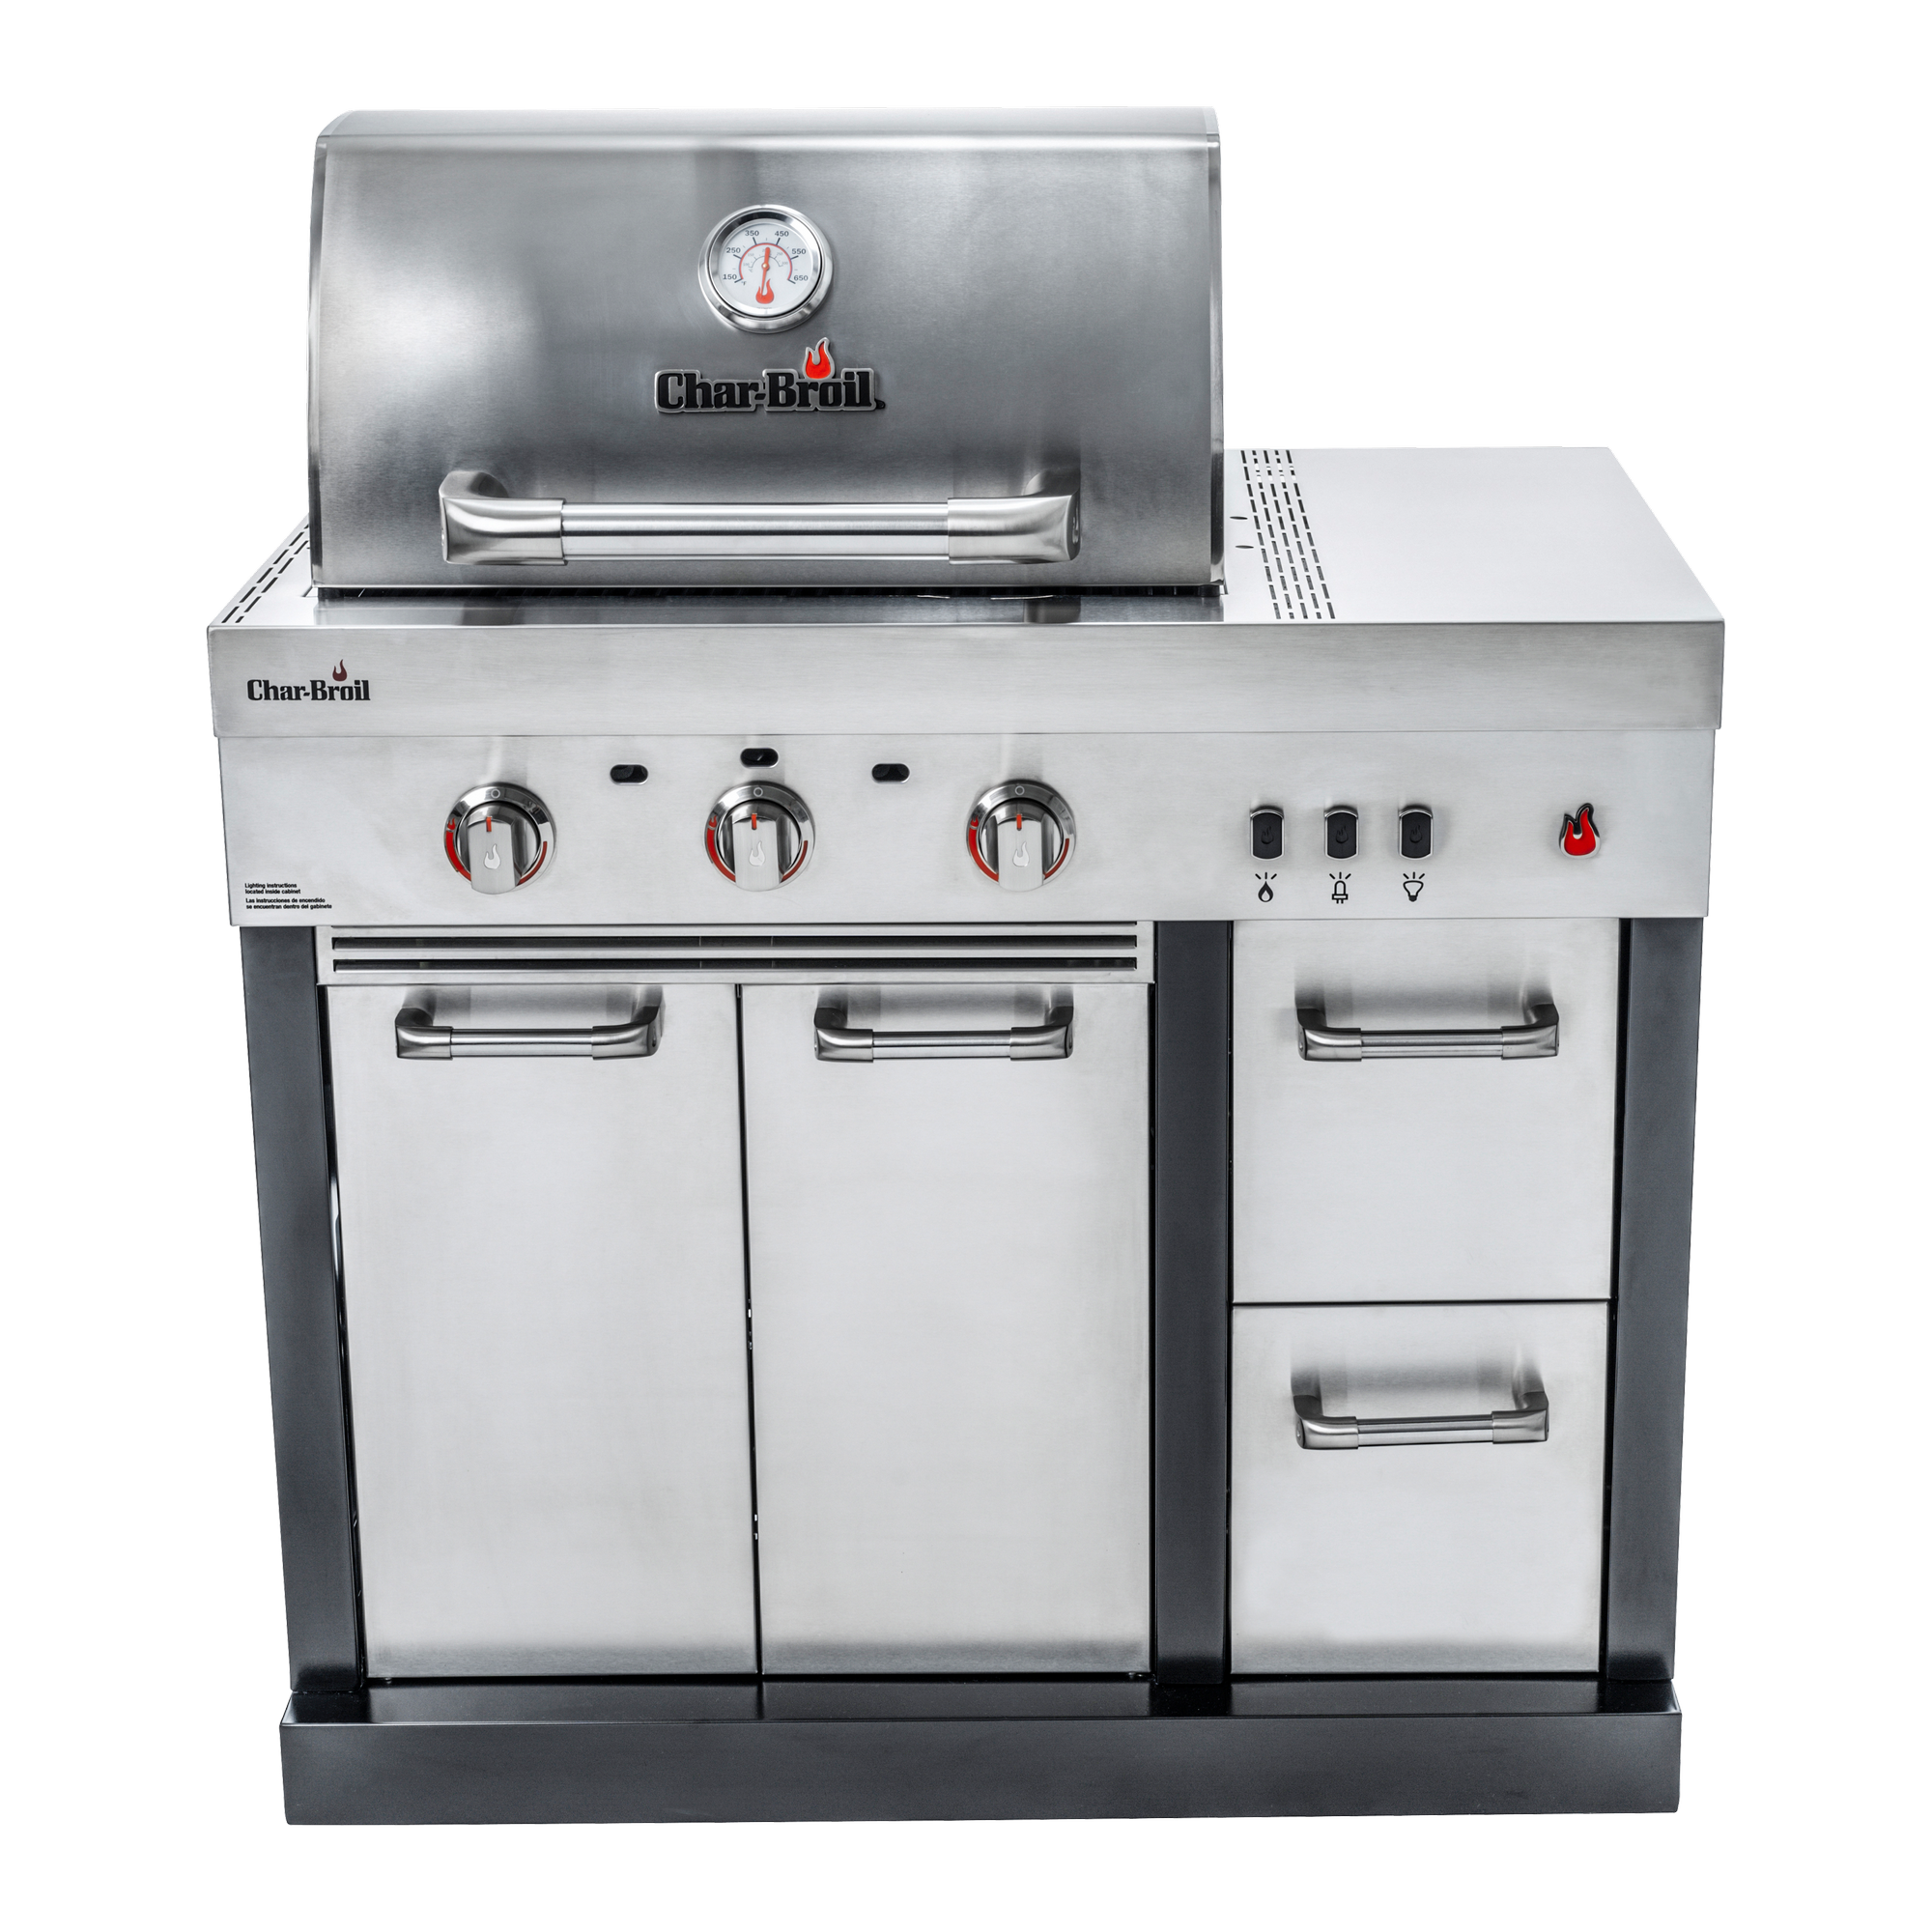 Gasgrill 'Ultimate 3200' 3 Brenner, Edelstahl, 120 x 100,3 x 67,3 cm + product picture